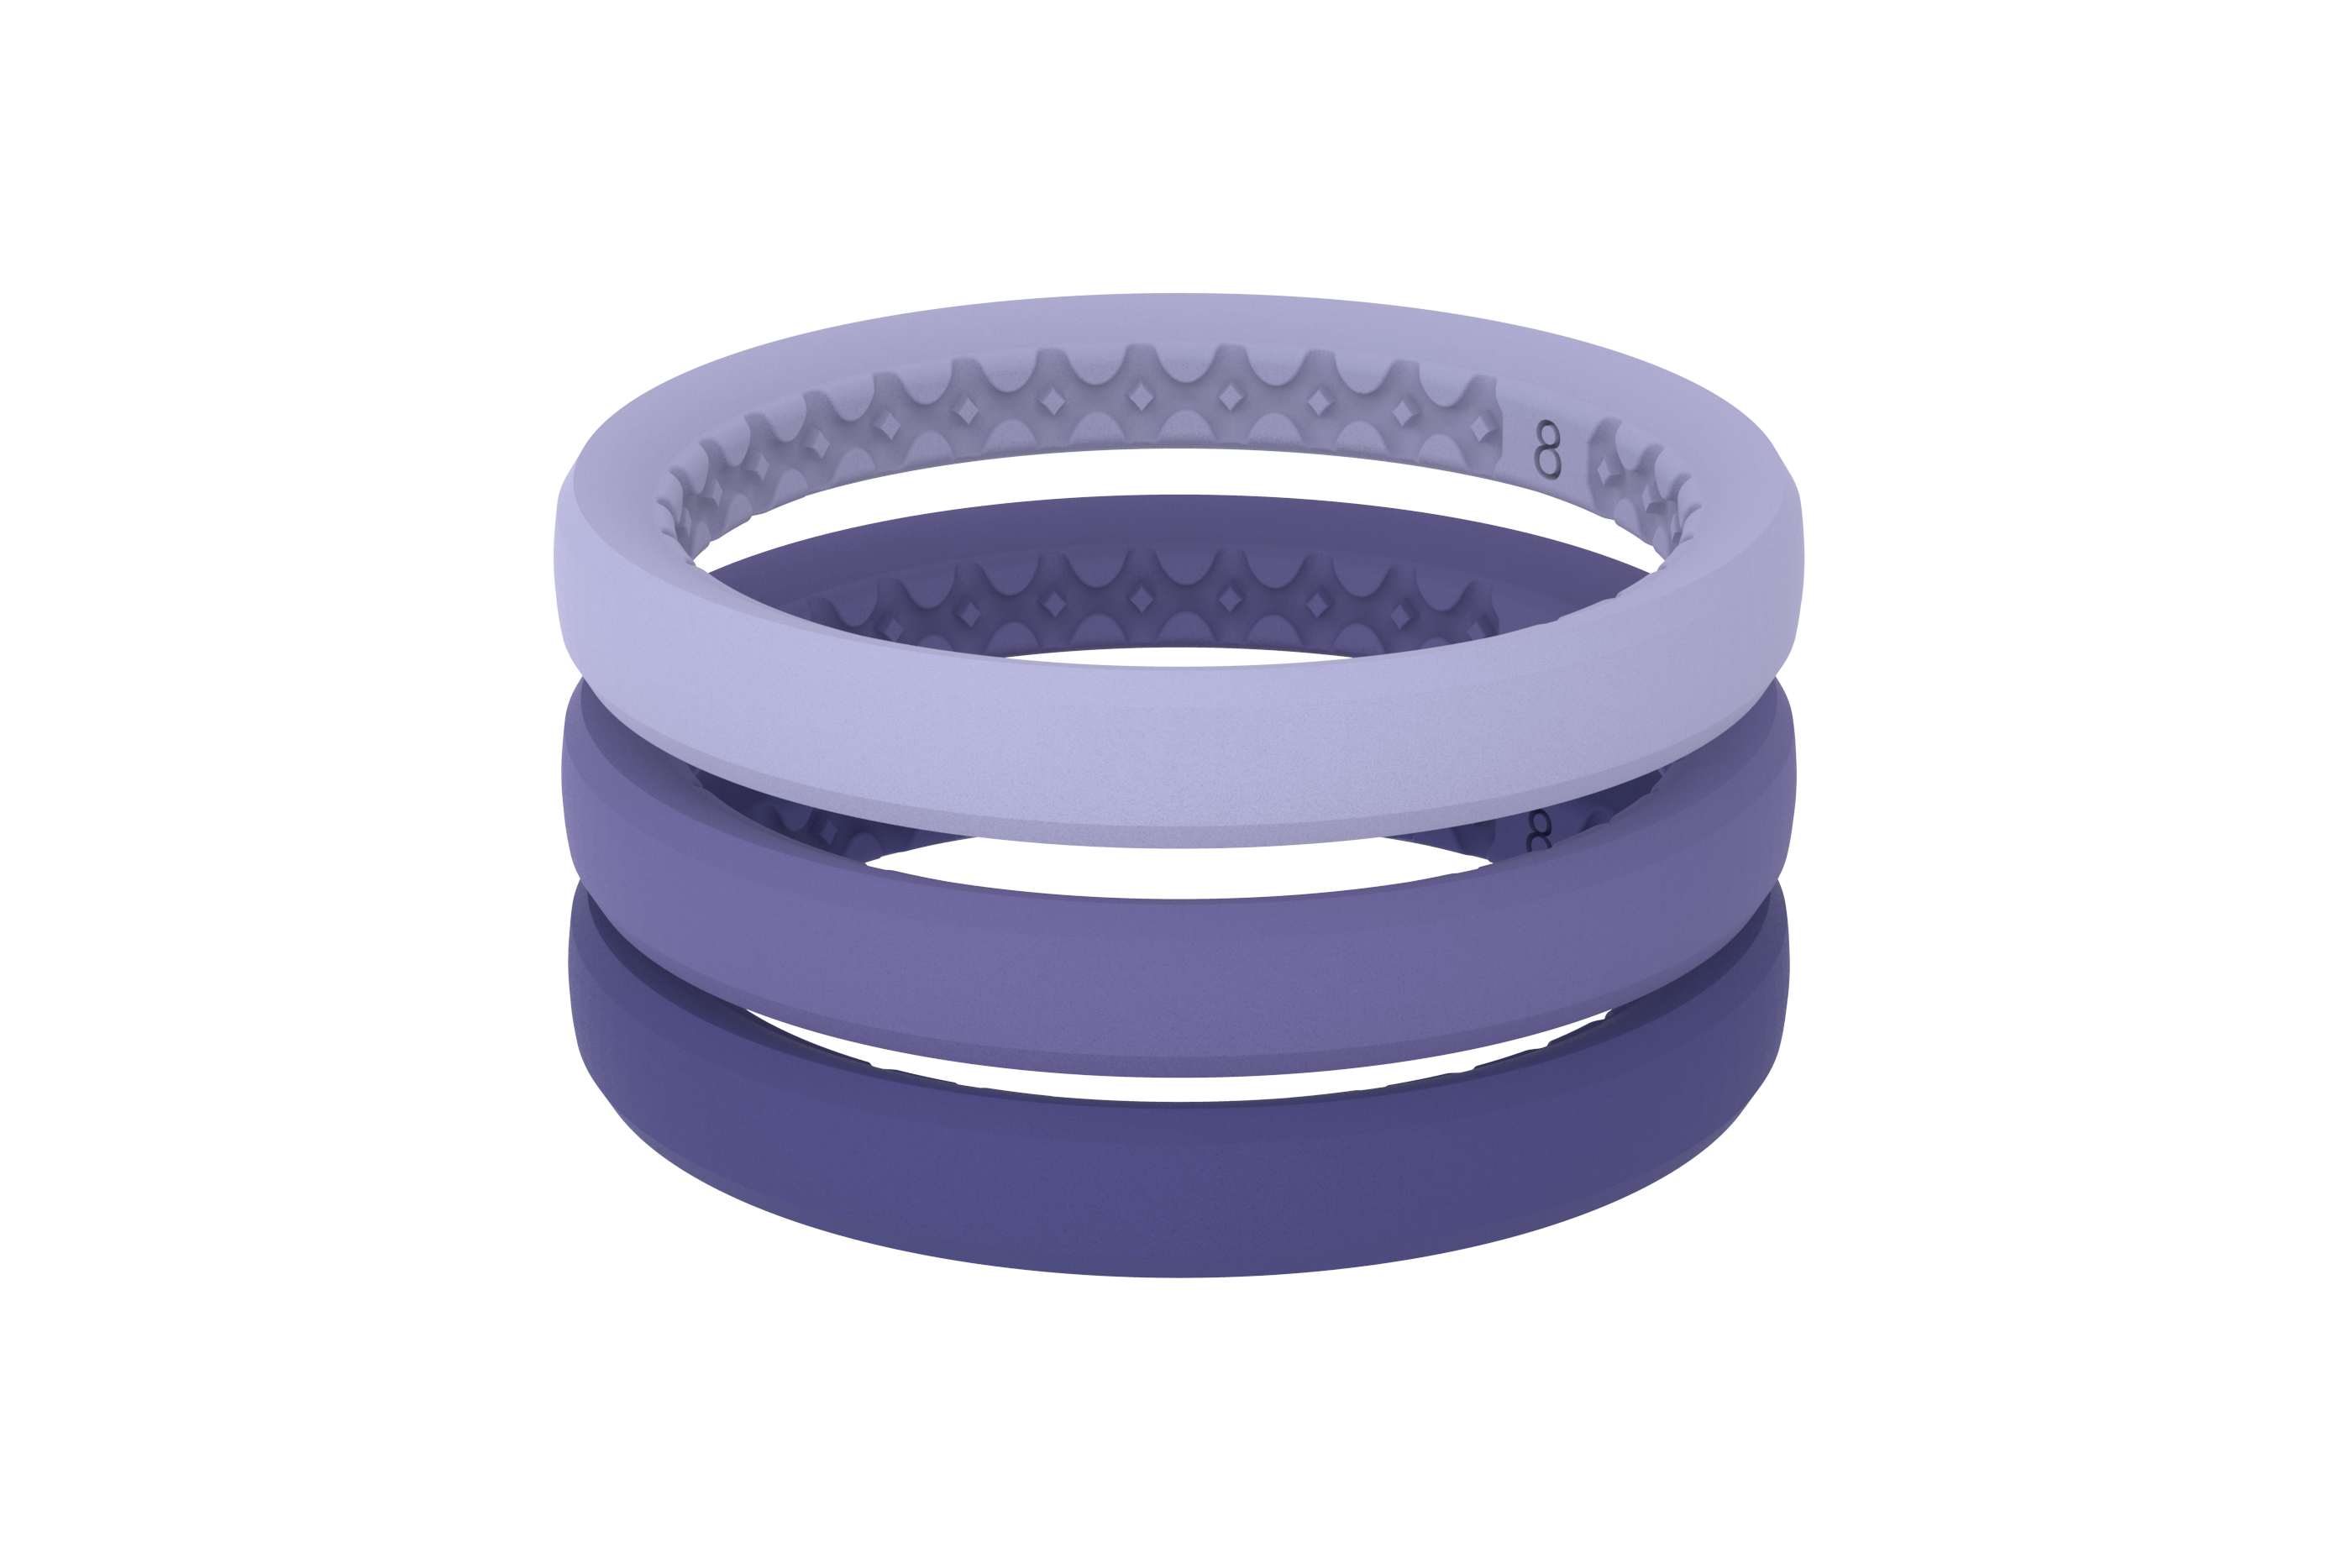 Interstellar stackable ring viewed from front 